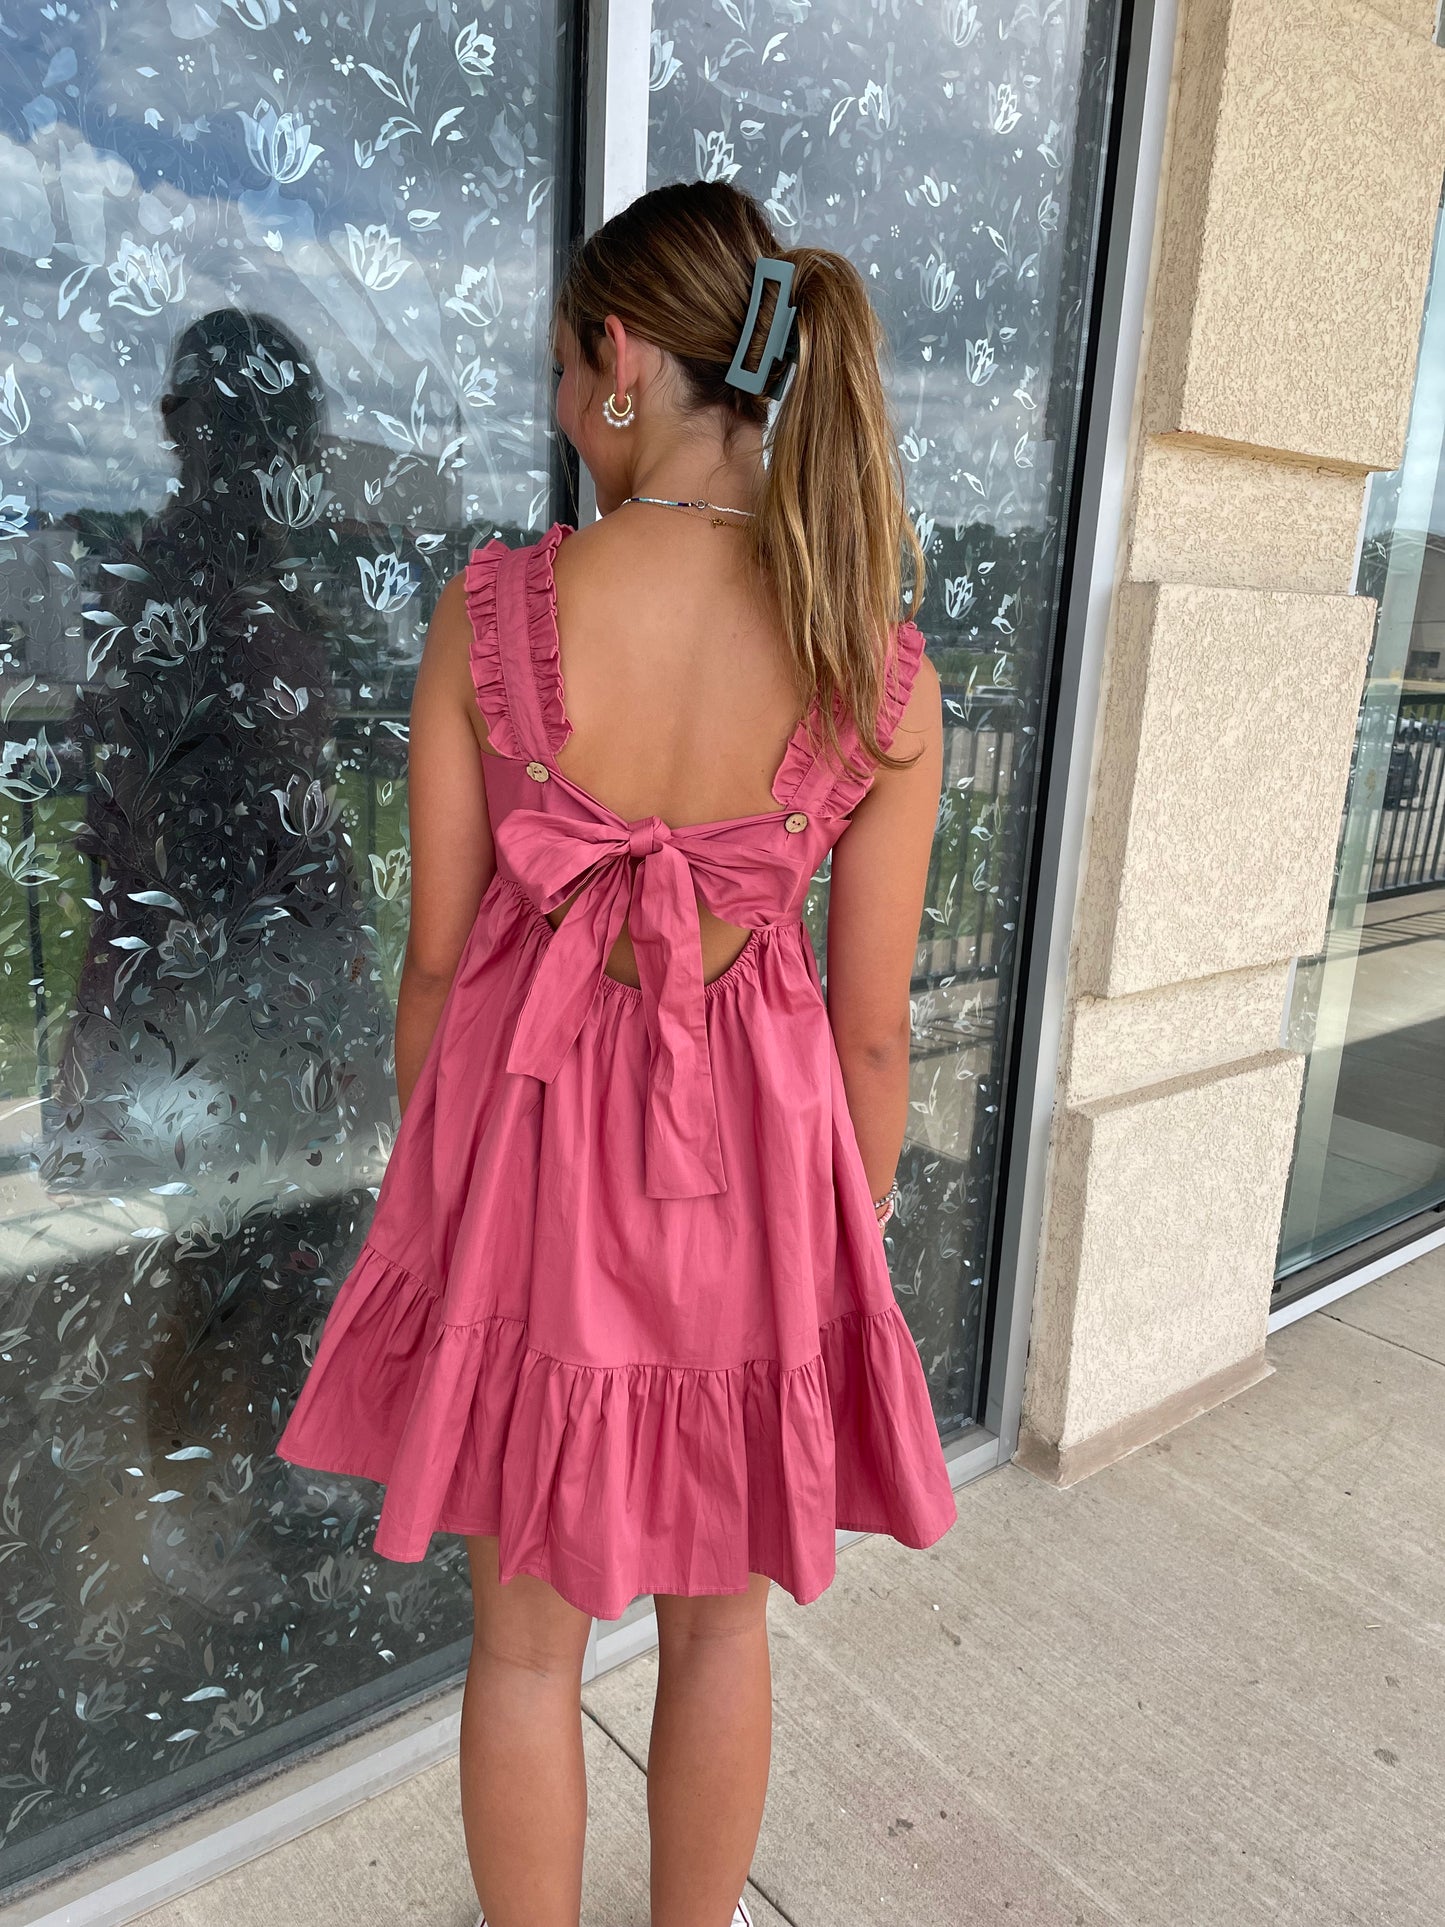 Searching for Summer Dress